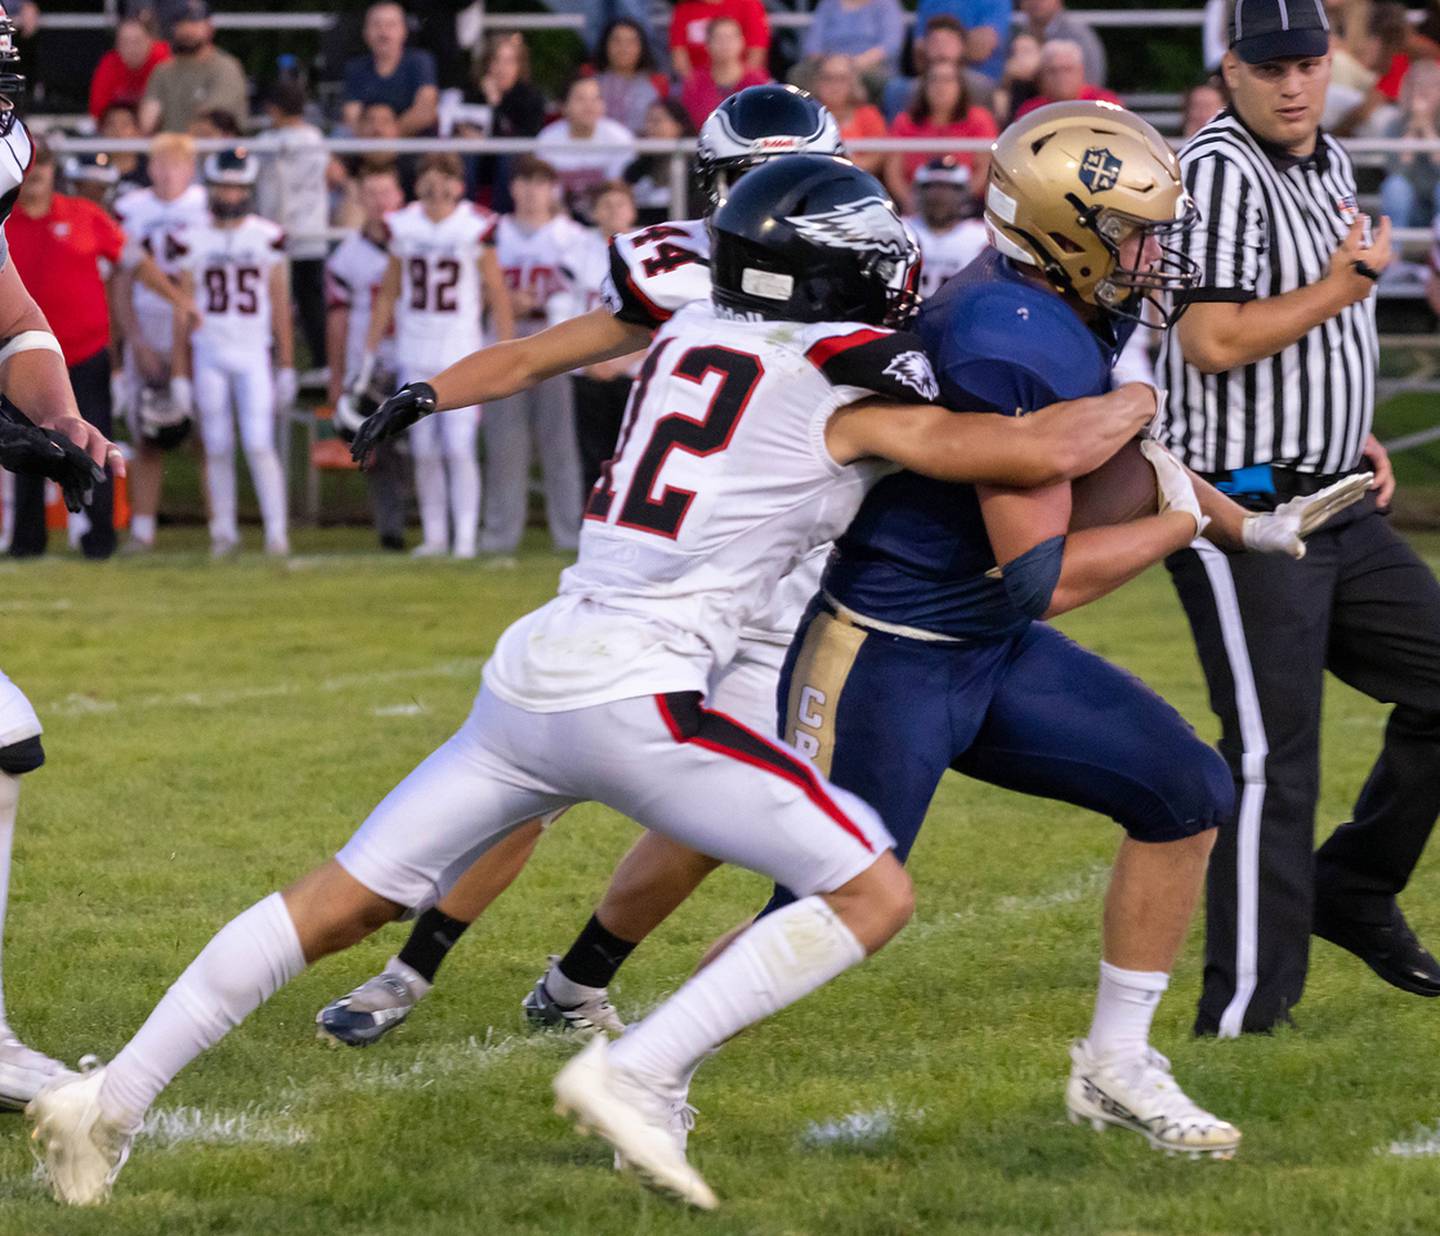 Marquette's Jurnee Reed tries to shed Aurora Christian's Sal Delgado on a carry in the second quarter on Friday, Aug. 26, 2022, at Gould Stadium in Ottawa.